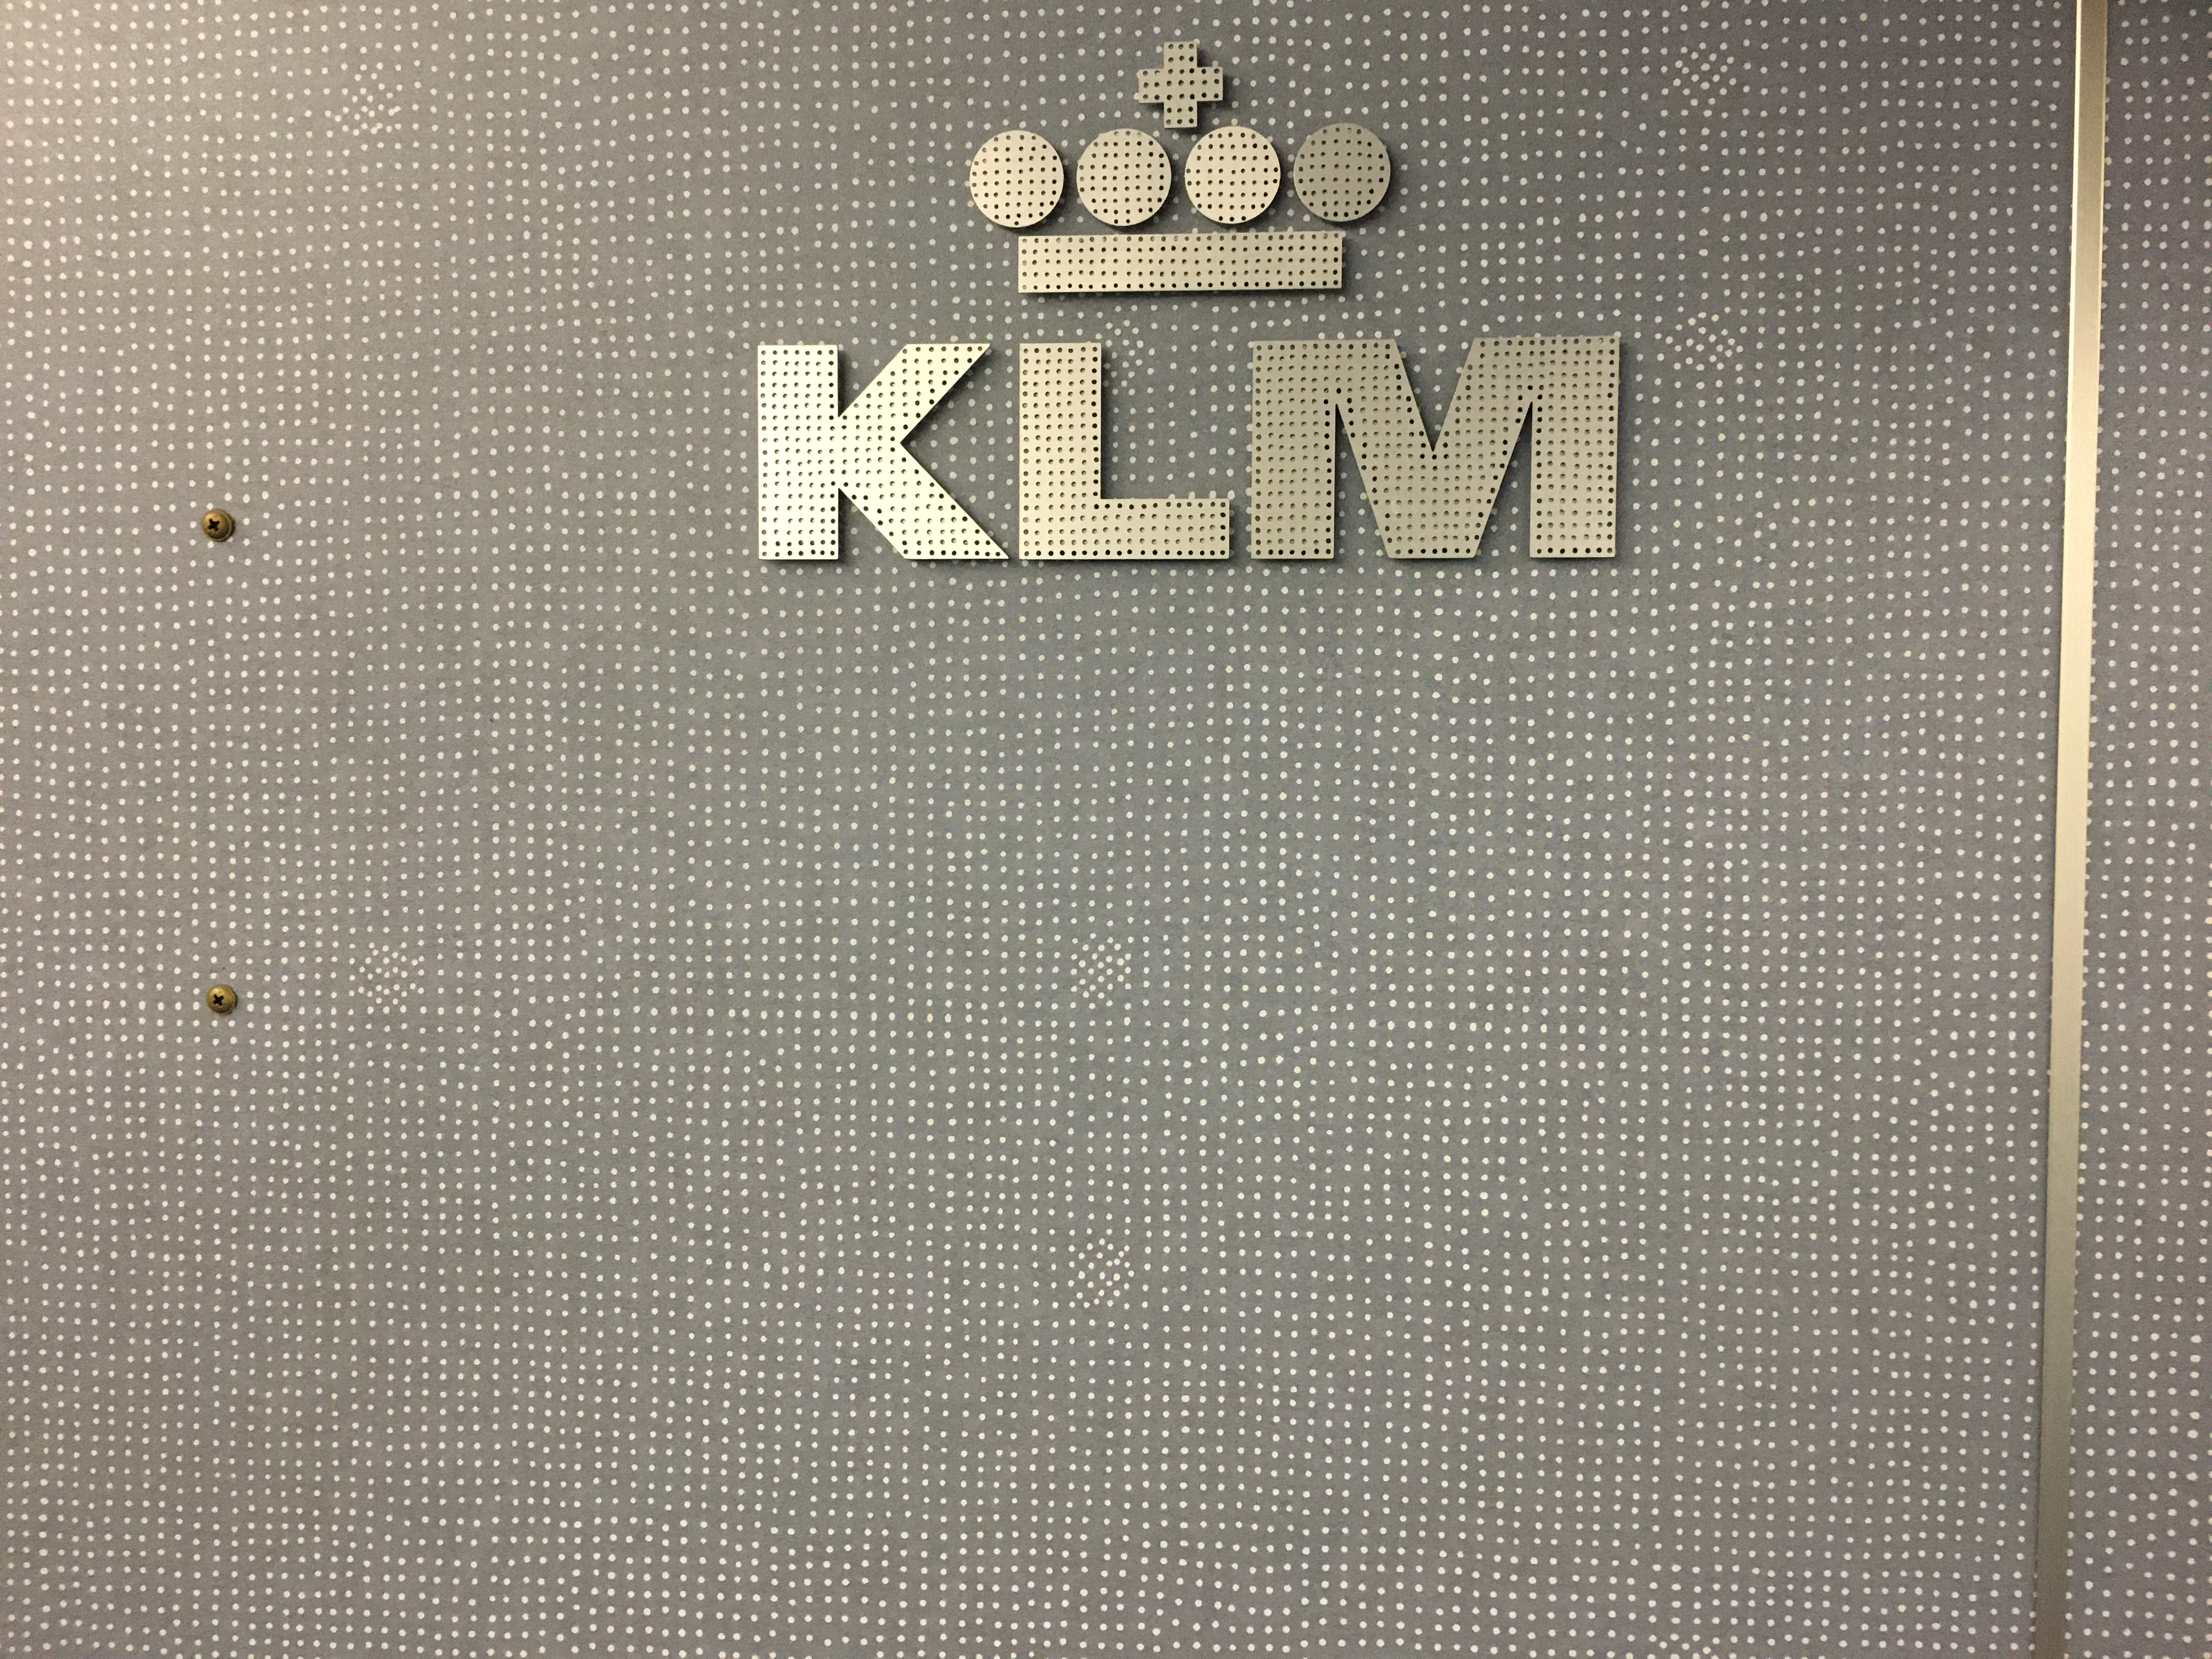 Business Class Review : KLMオランダ航空(KL) KL856 ソウル仁川(ICN) – アムステルダム(AMS) 機内食はヴィーガンミール